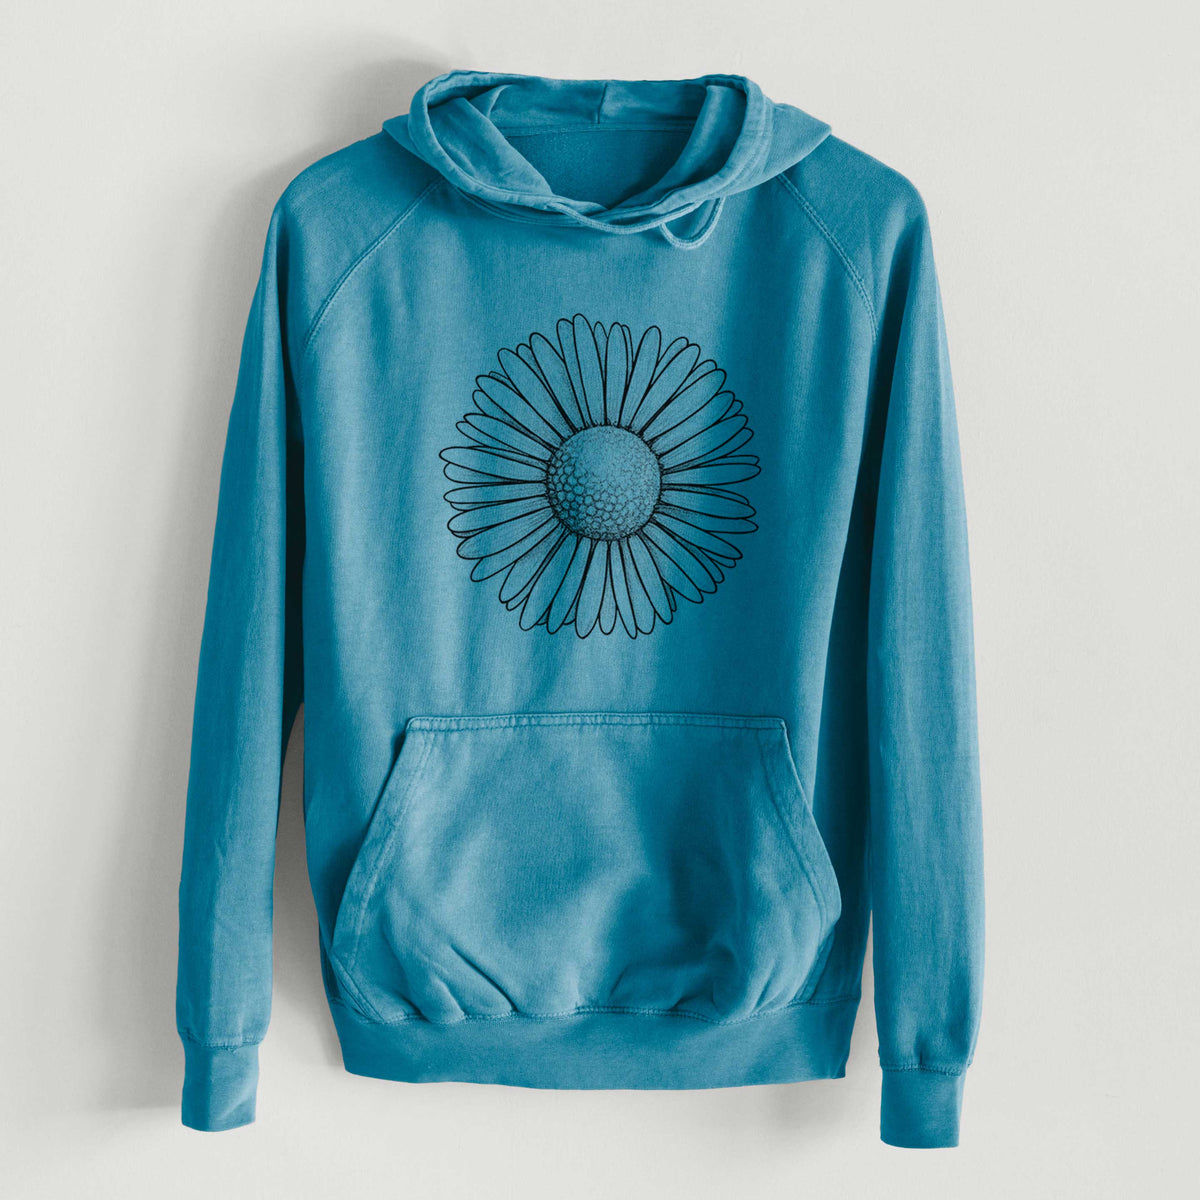 Bellis perennis - The Common Daisy  - Mid-Weight Unisex Vintage 100% Cotton Hoodie